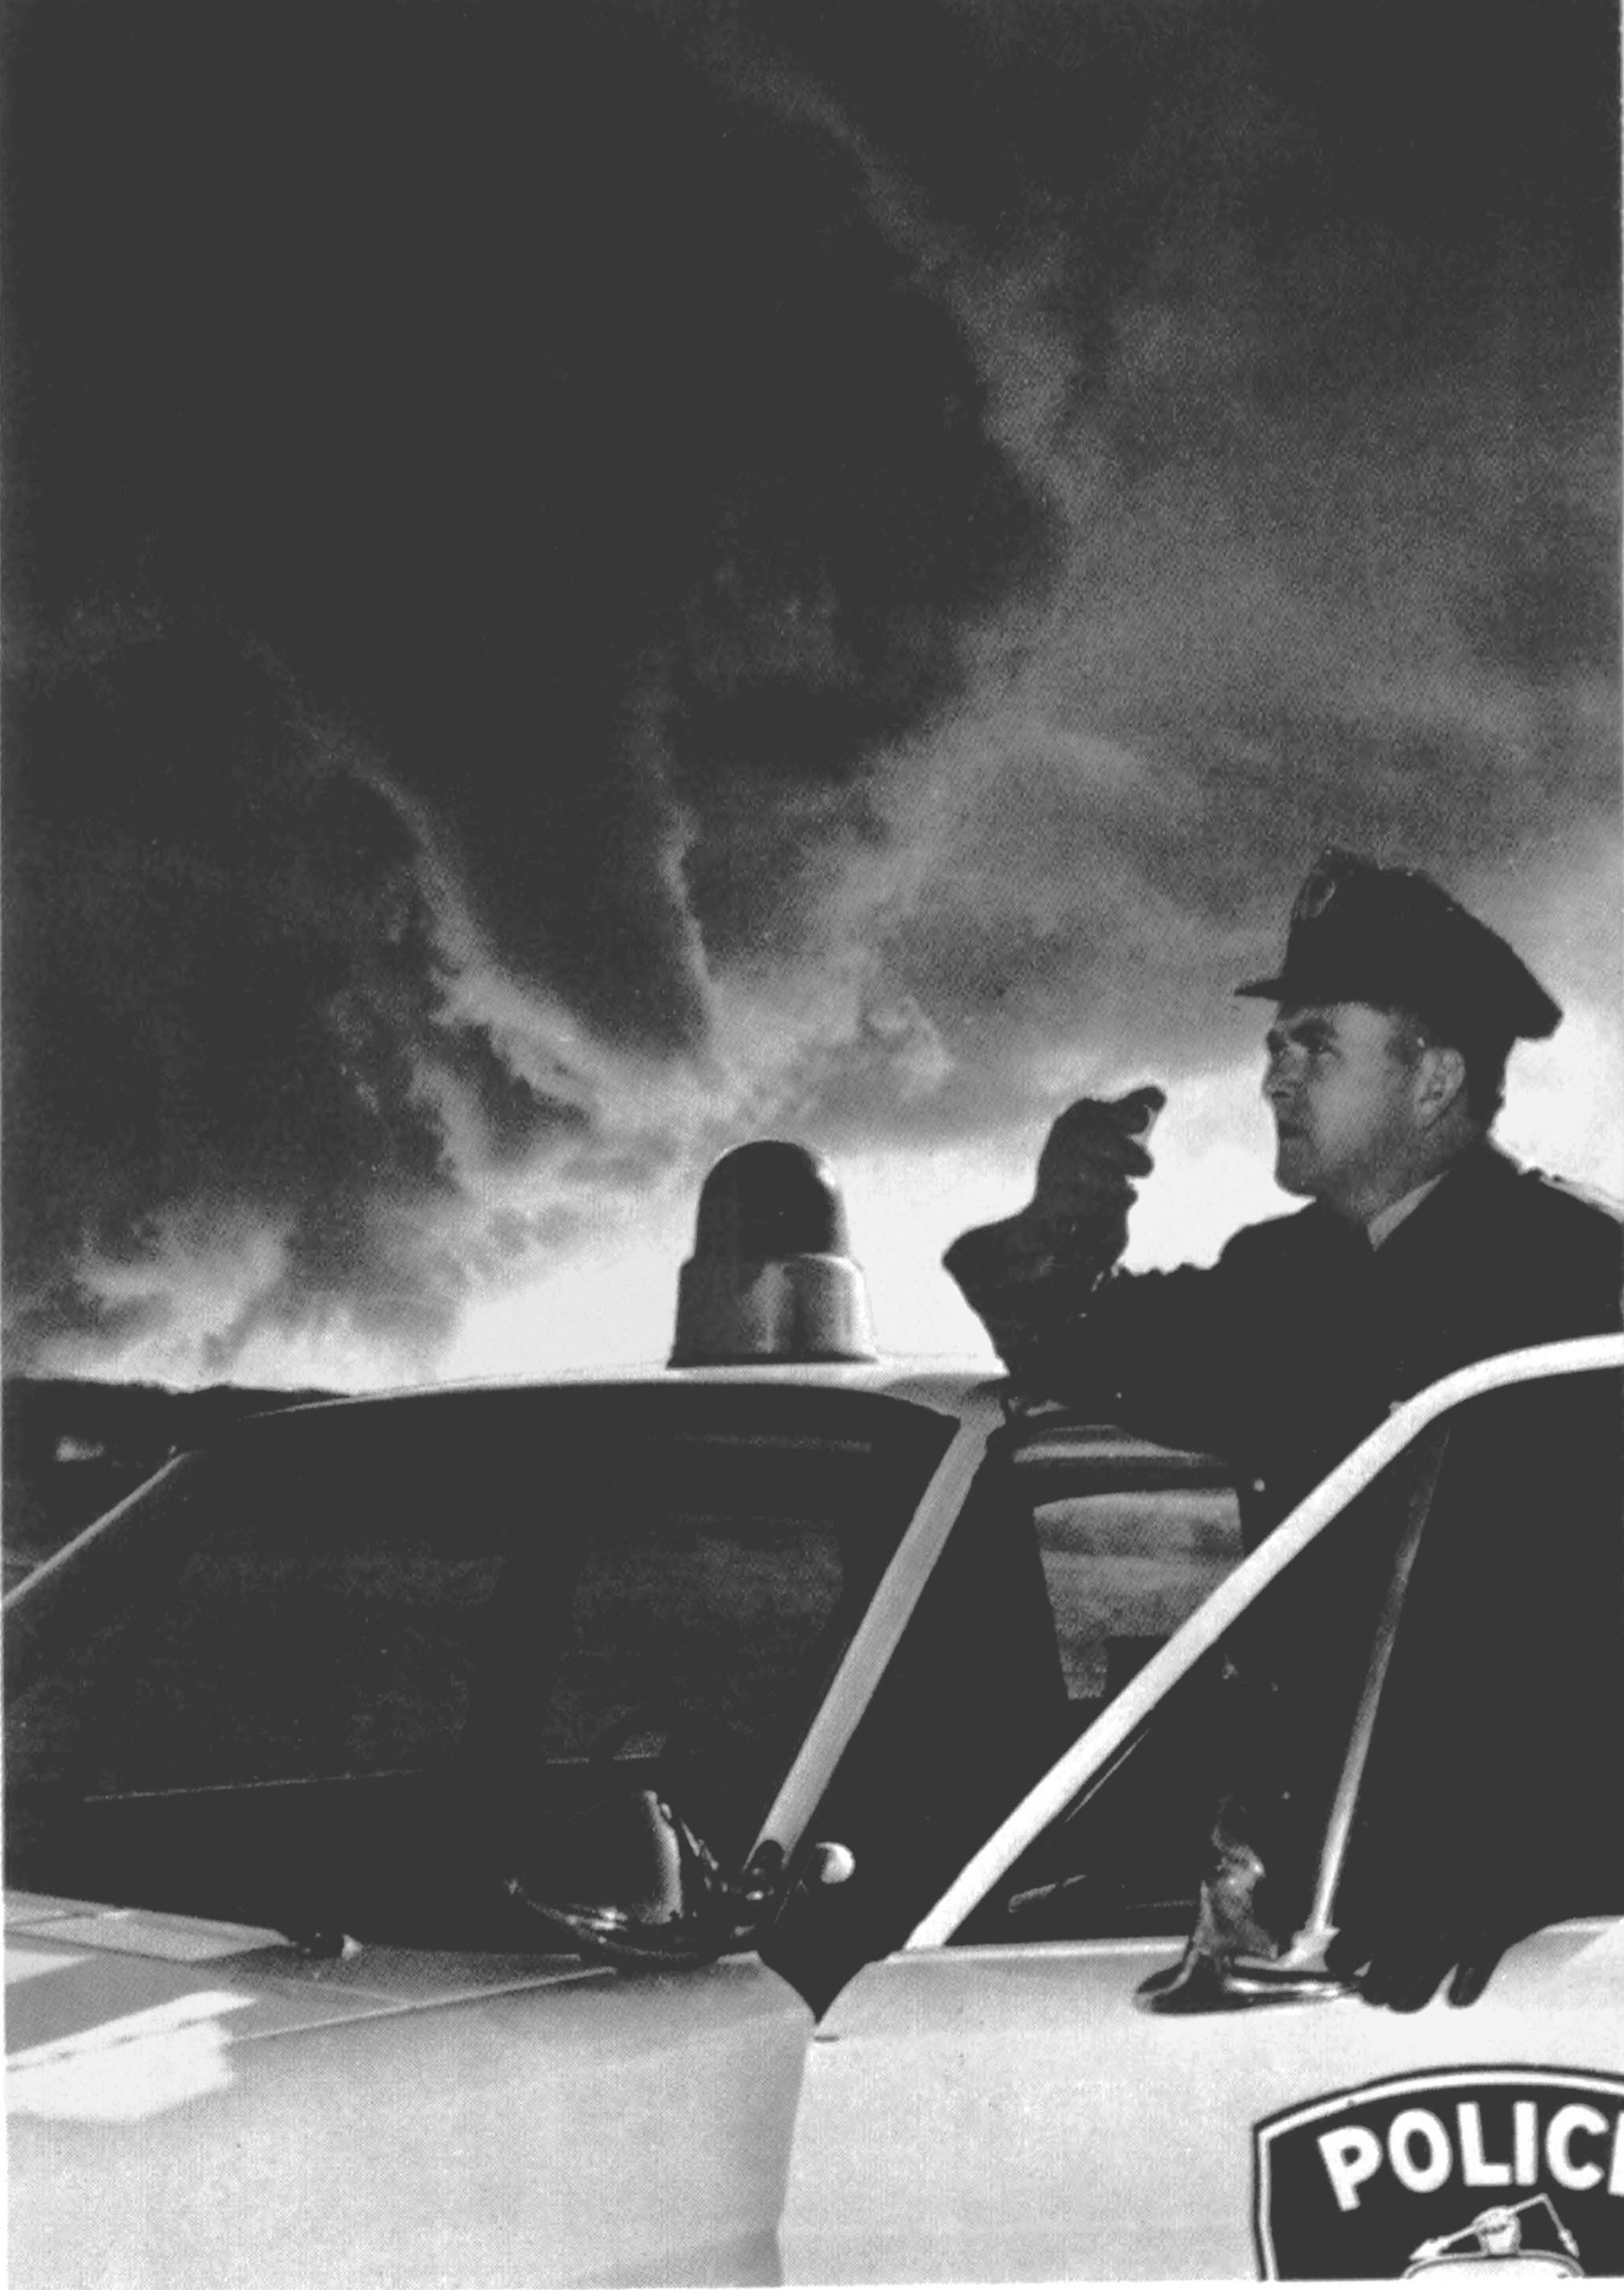 Tornado: US Department of Commerce (1973). A police officer reports a tornado by radio, as part of the SKYWARN warning system